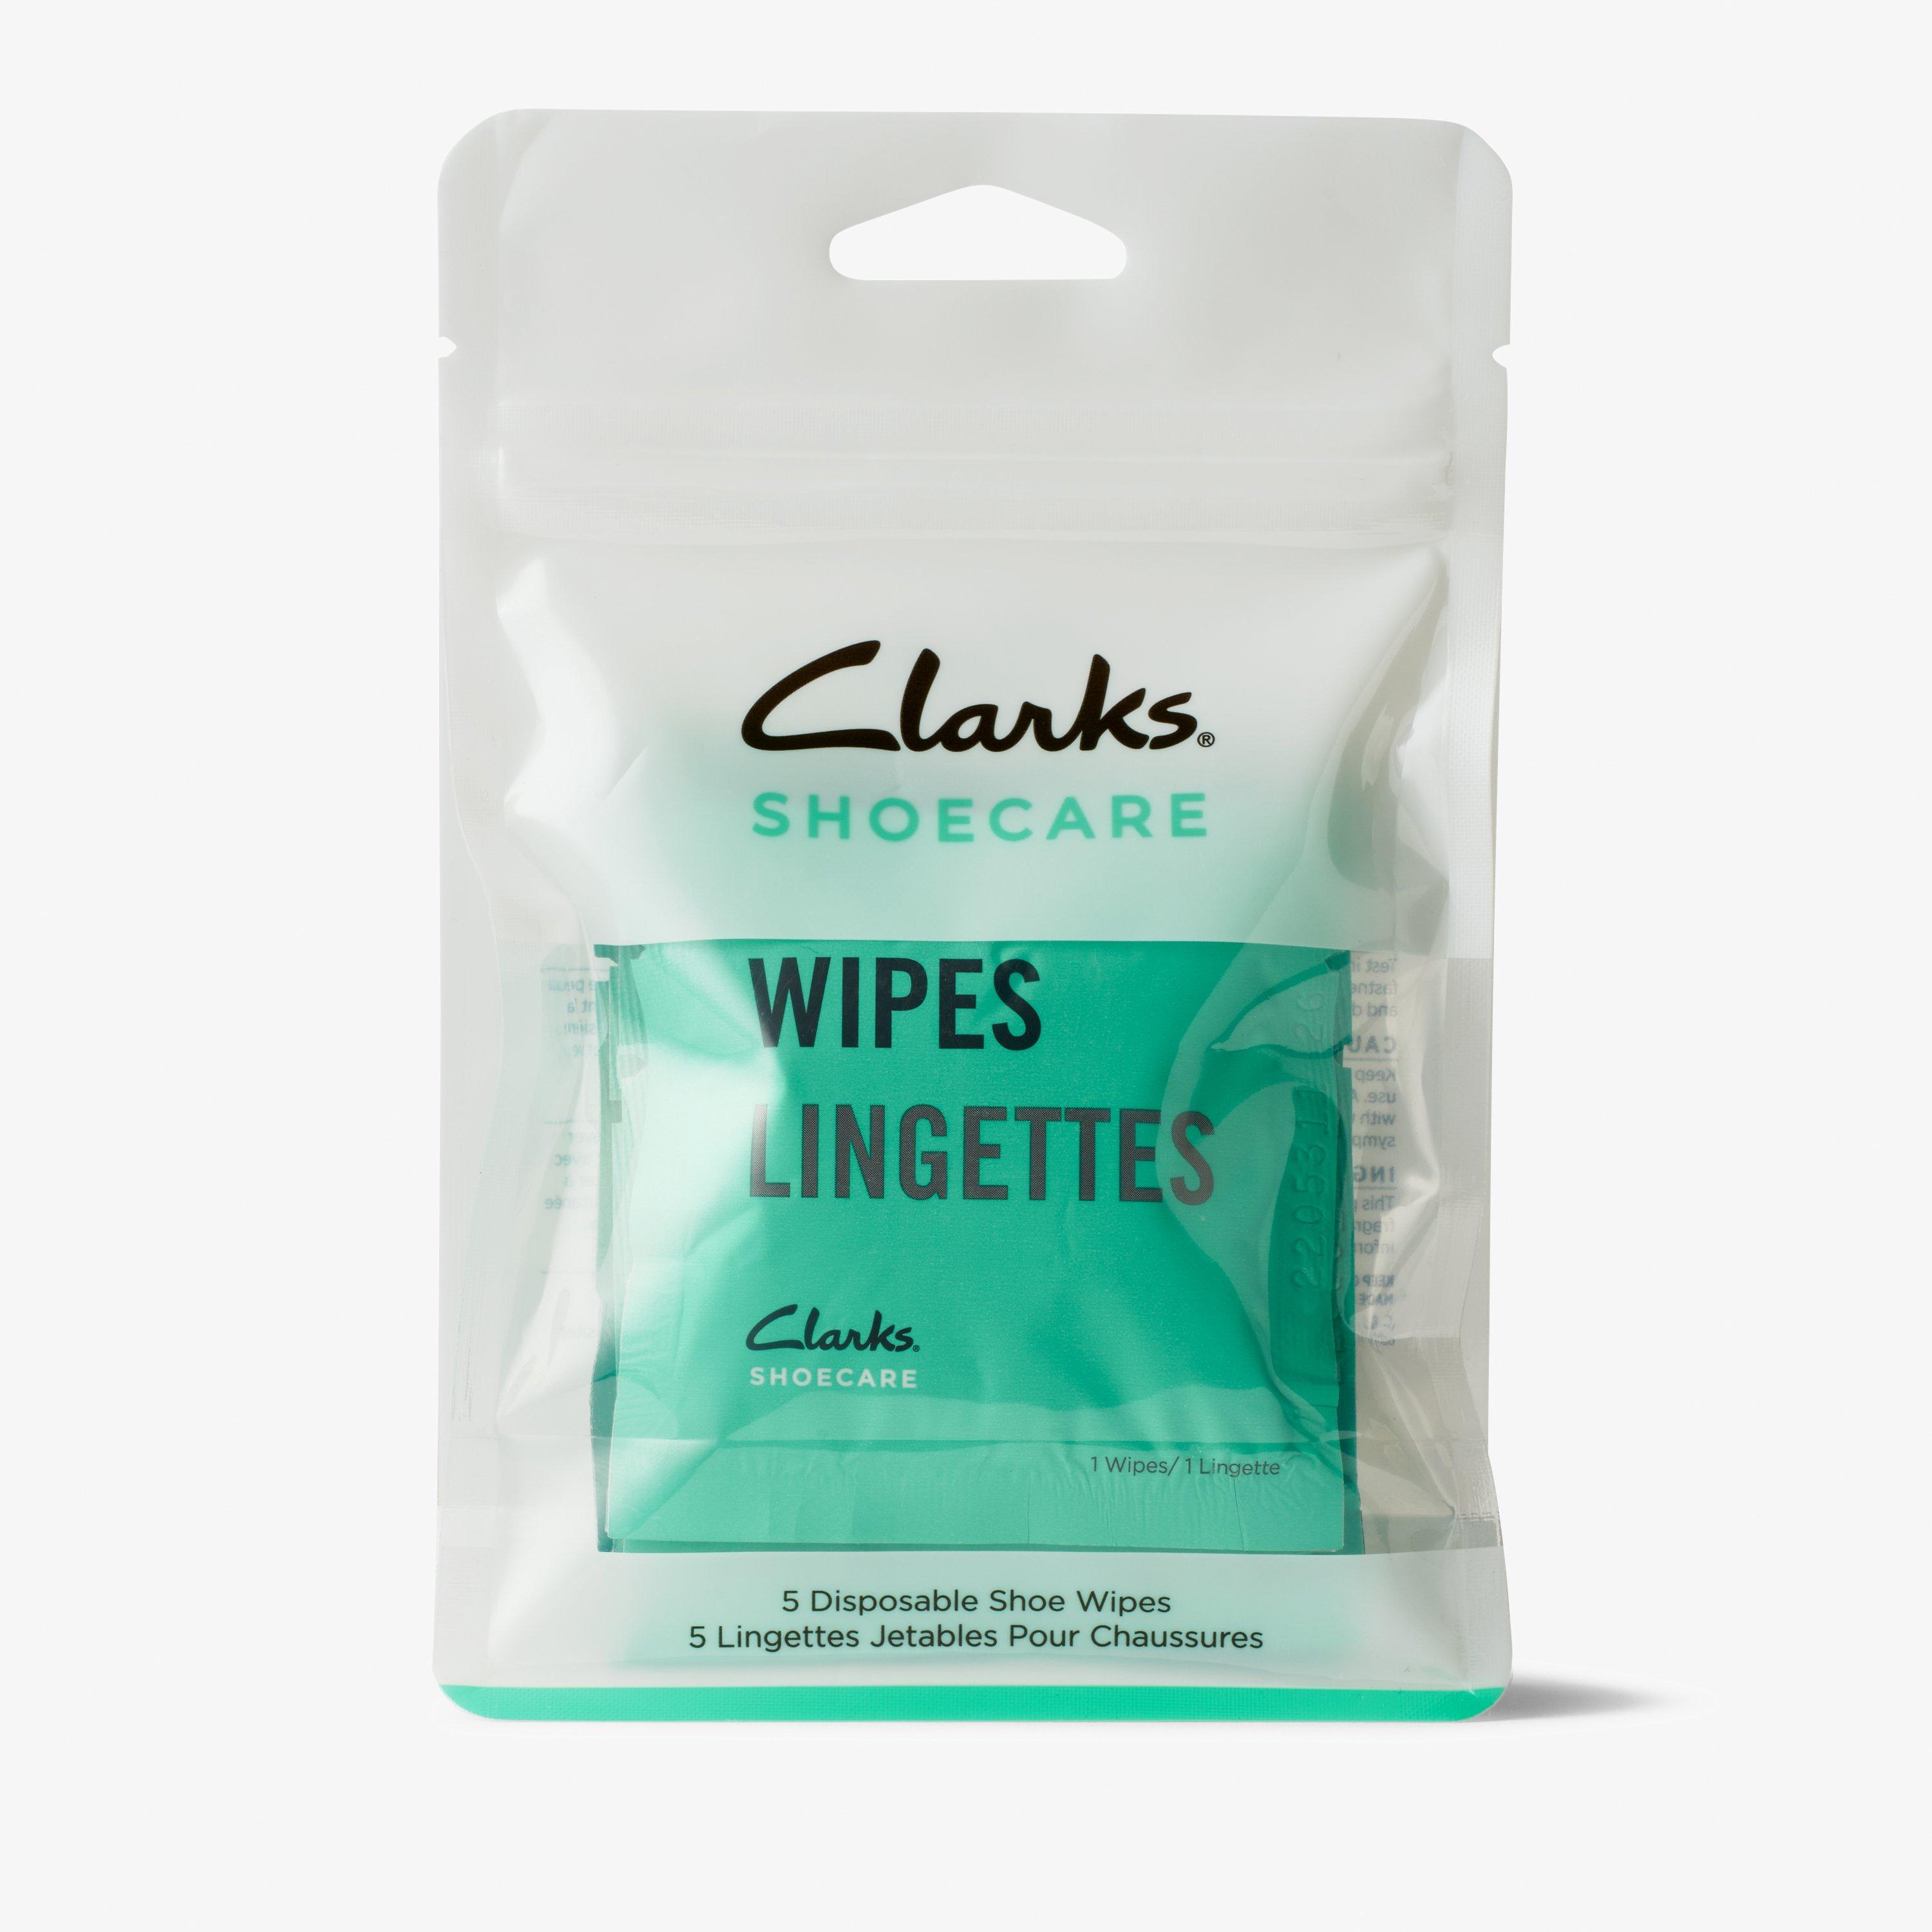 Clarks Shoecare Wipes 5 Pack N/A Size 0